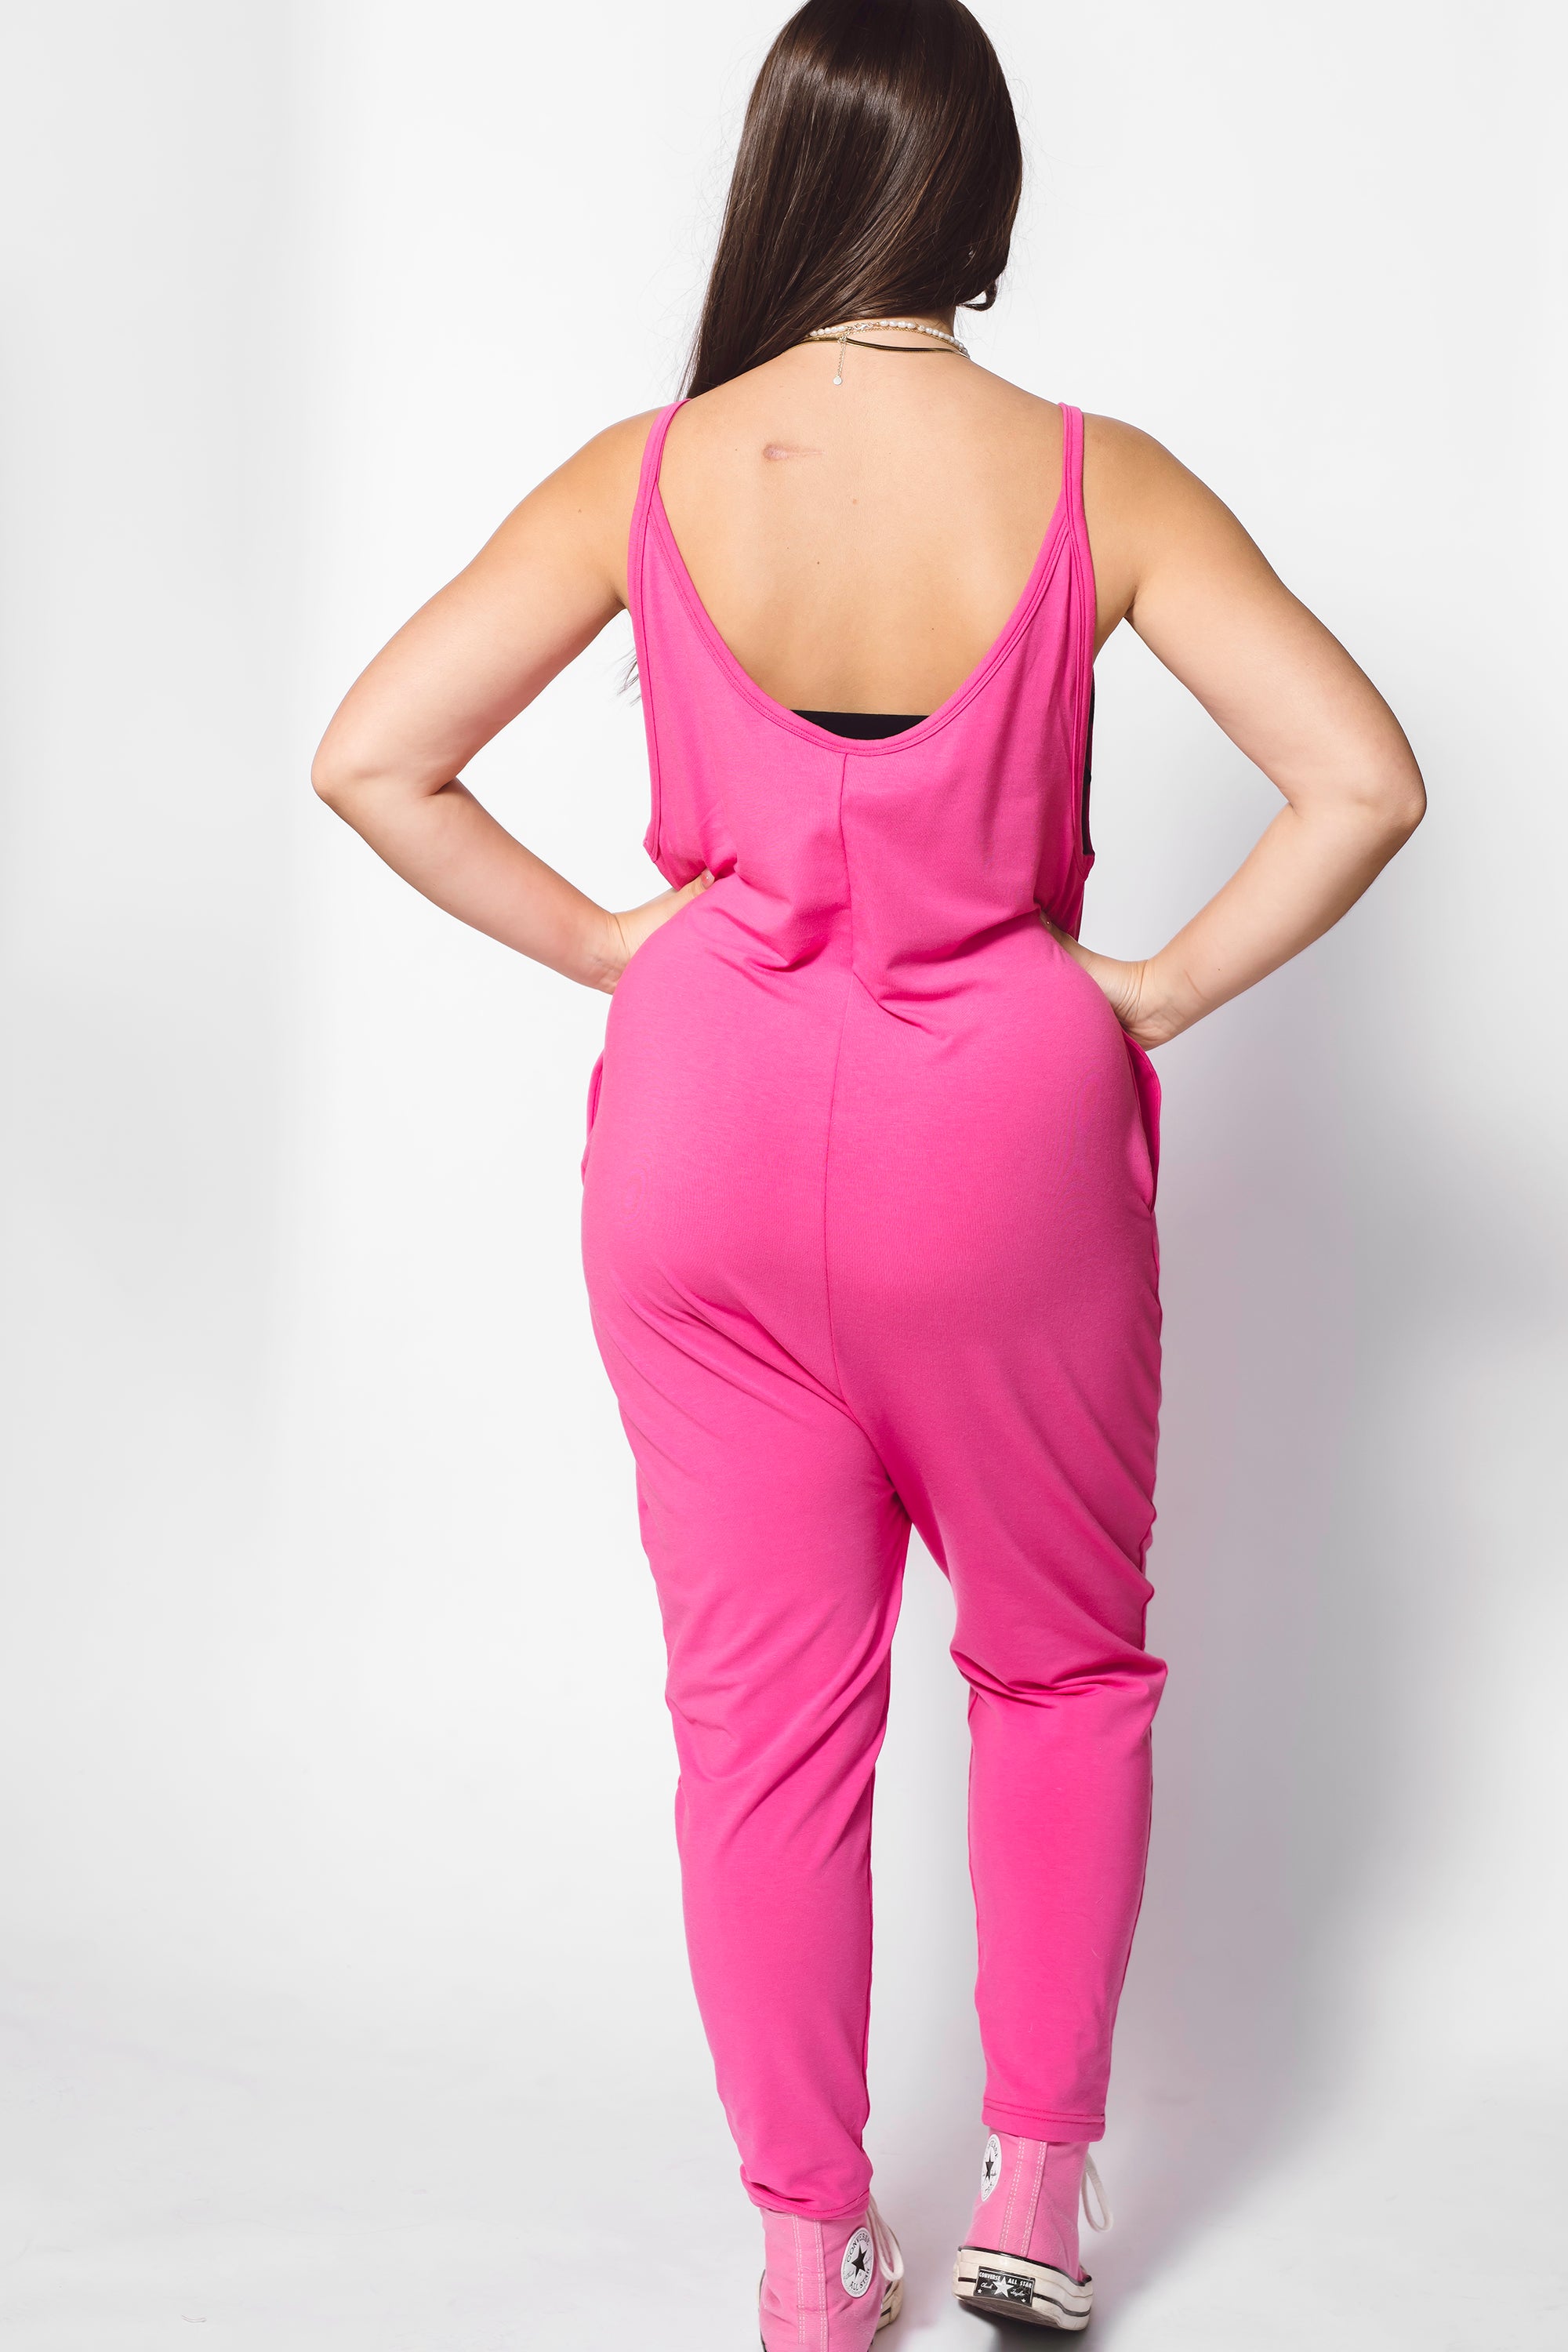 Fearless Frill Top Romper in Pop of Pink